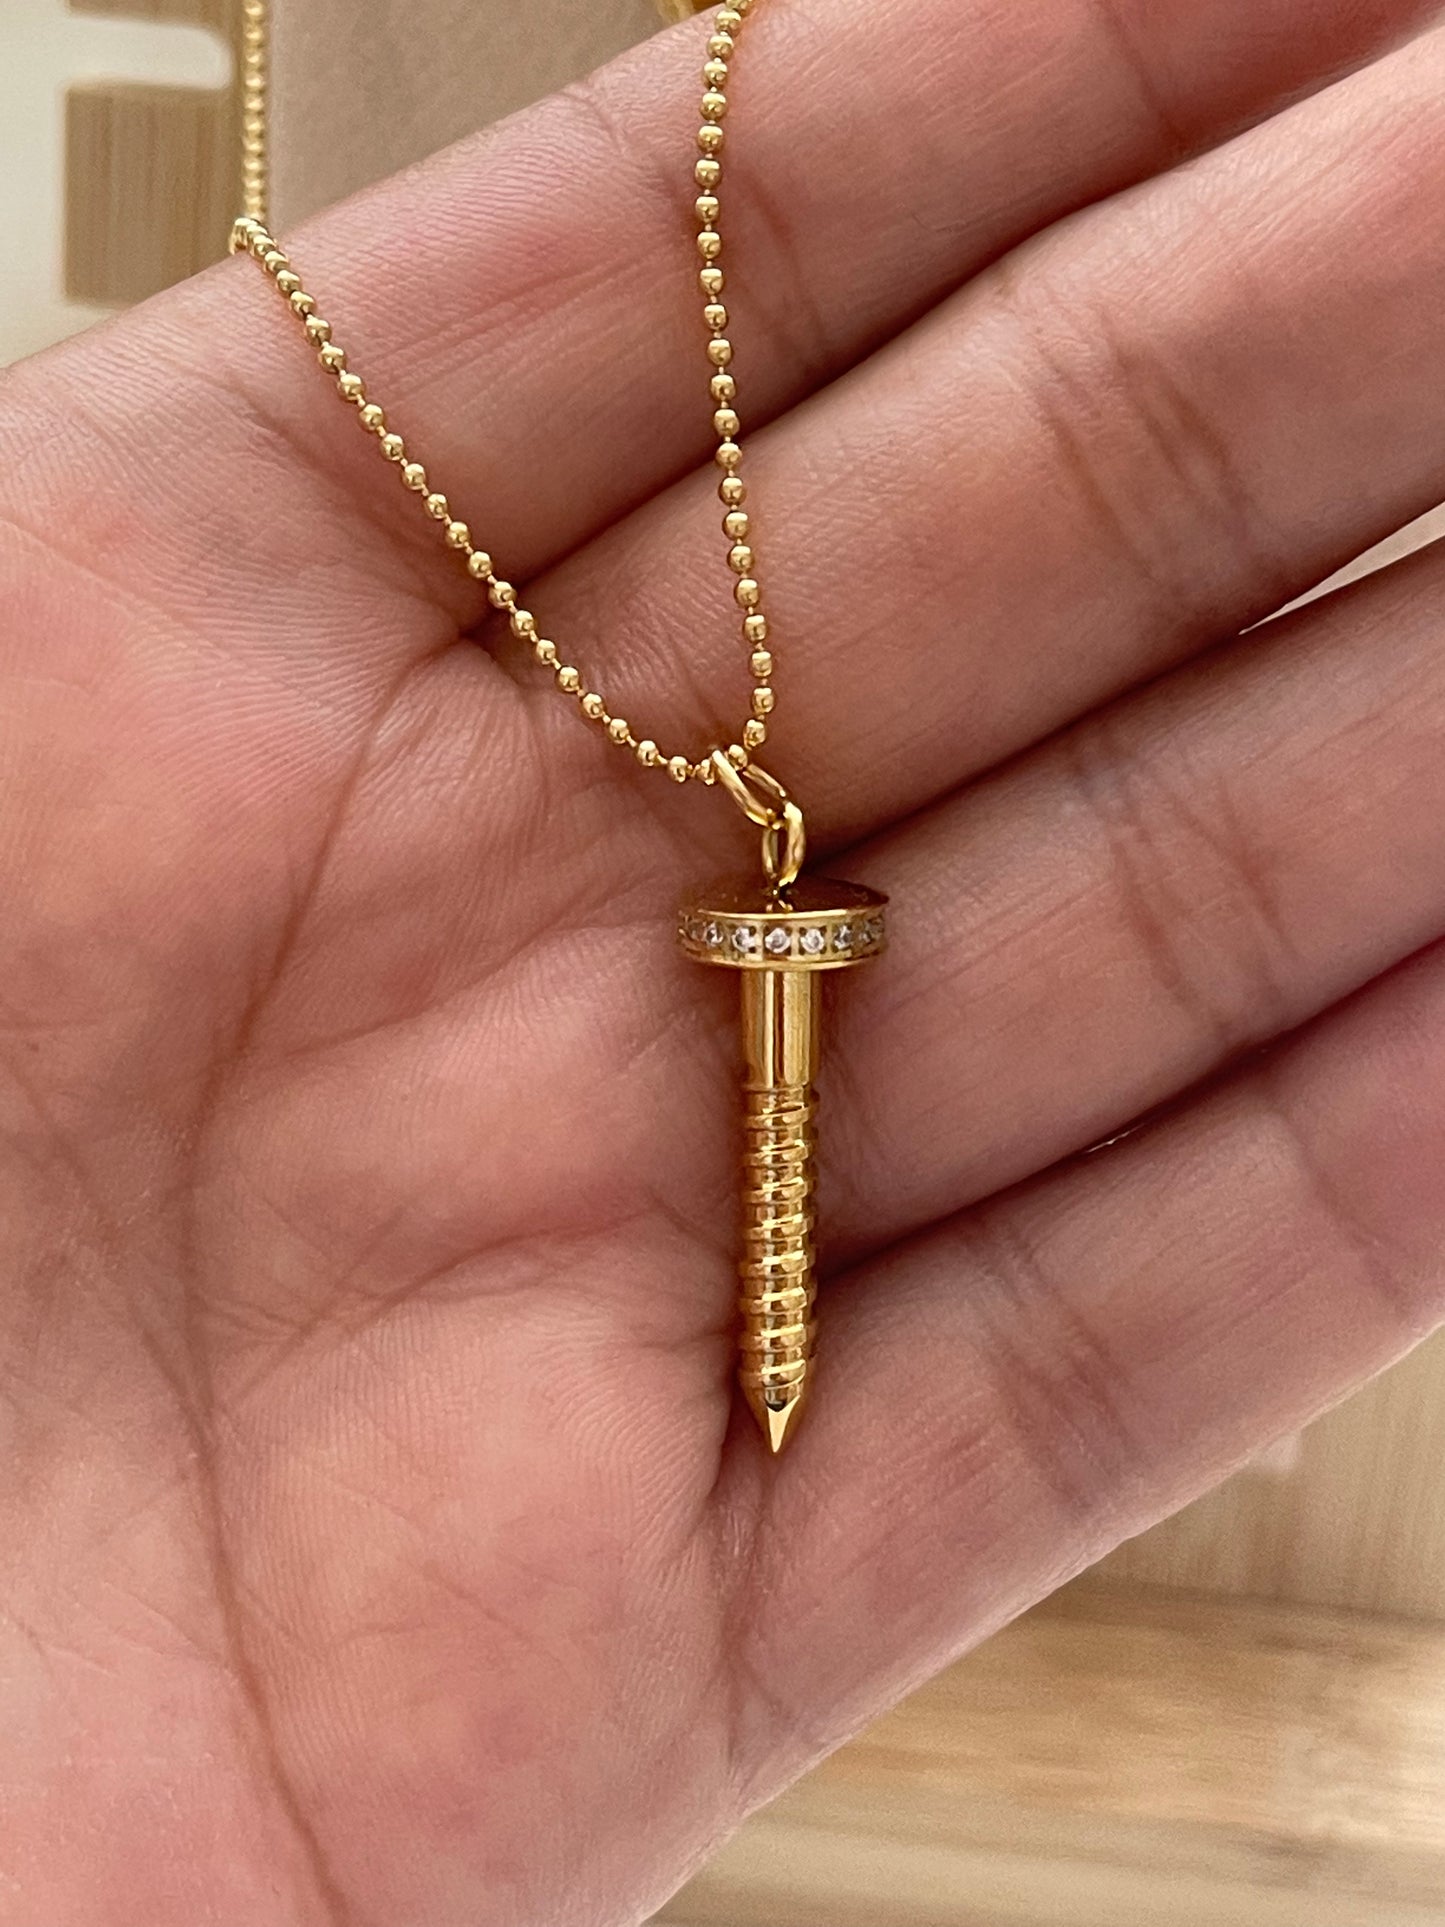 Nail necklace